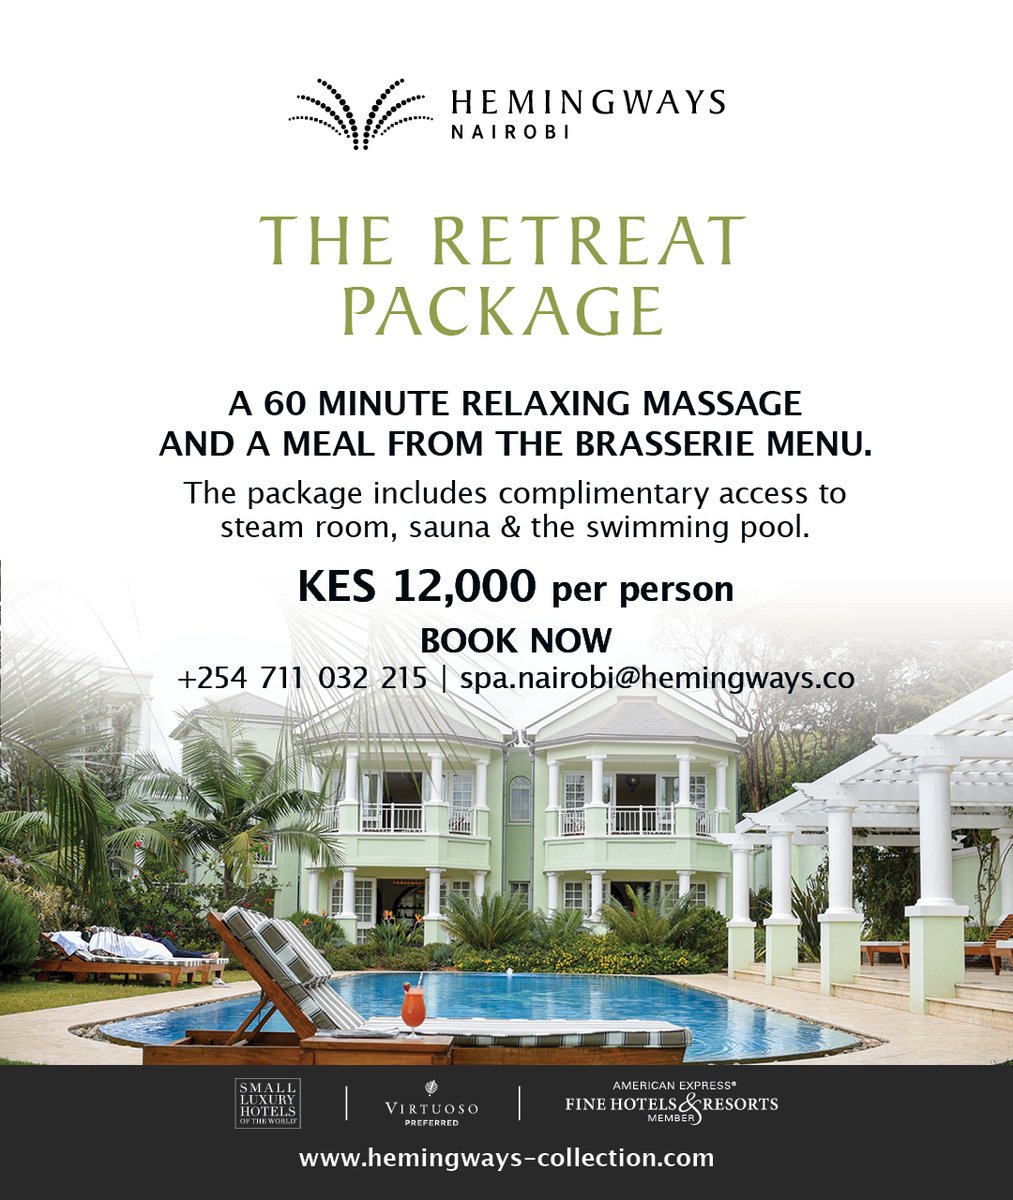 Indulge in the ultimate self-care experience with our luxurious Hemingways Retreat spa package! Treat yourself to a day of relaxation and pampering at #HemingwaysNairobi. You deserve it! #LuxurySpa #SelfCare